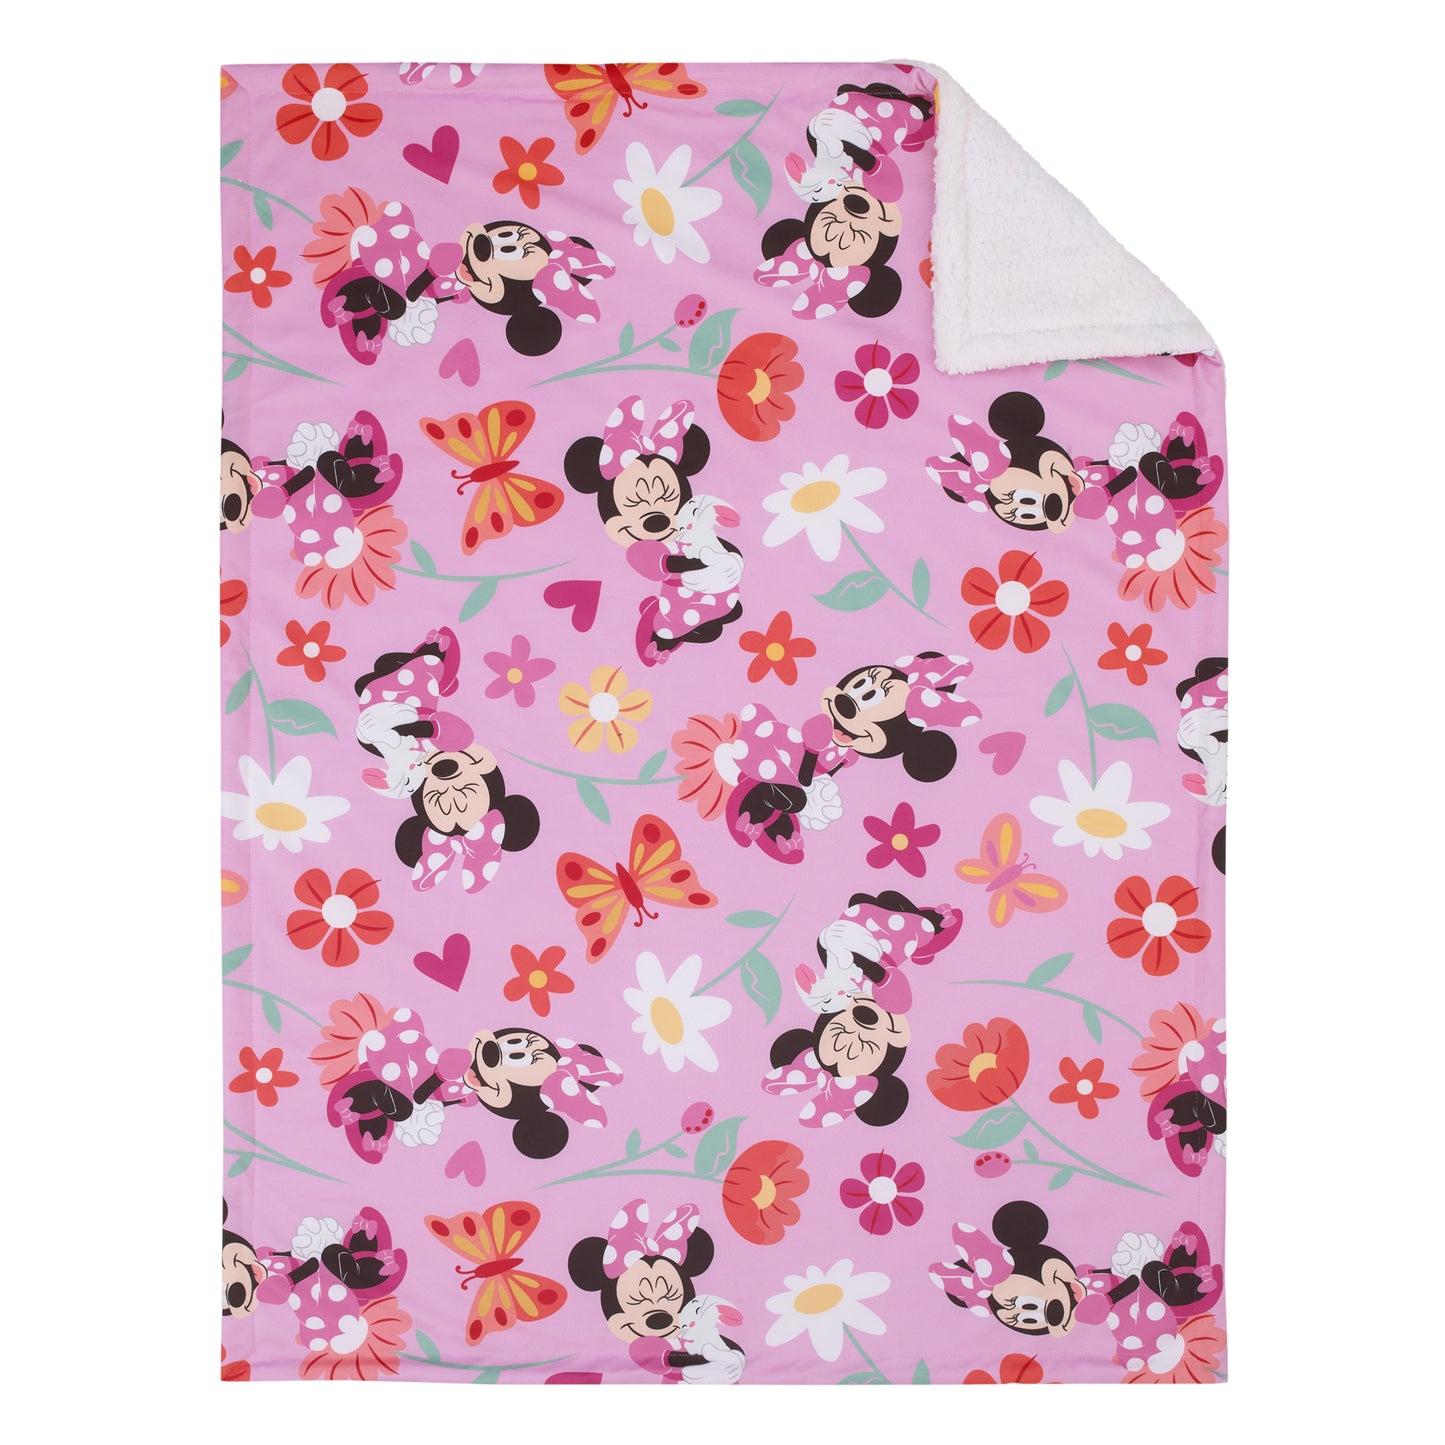 Disney Minnie Mouse Springtime Flowers Pink Orange, Green, and White Super Soft Sherpa Baby Blanket